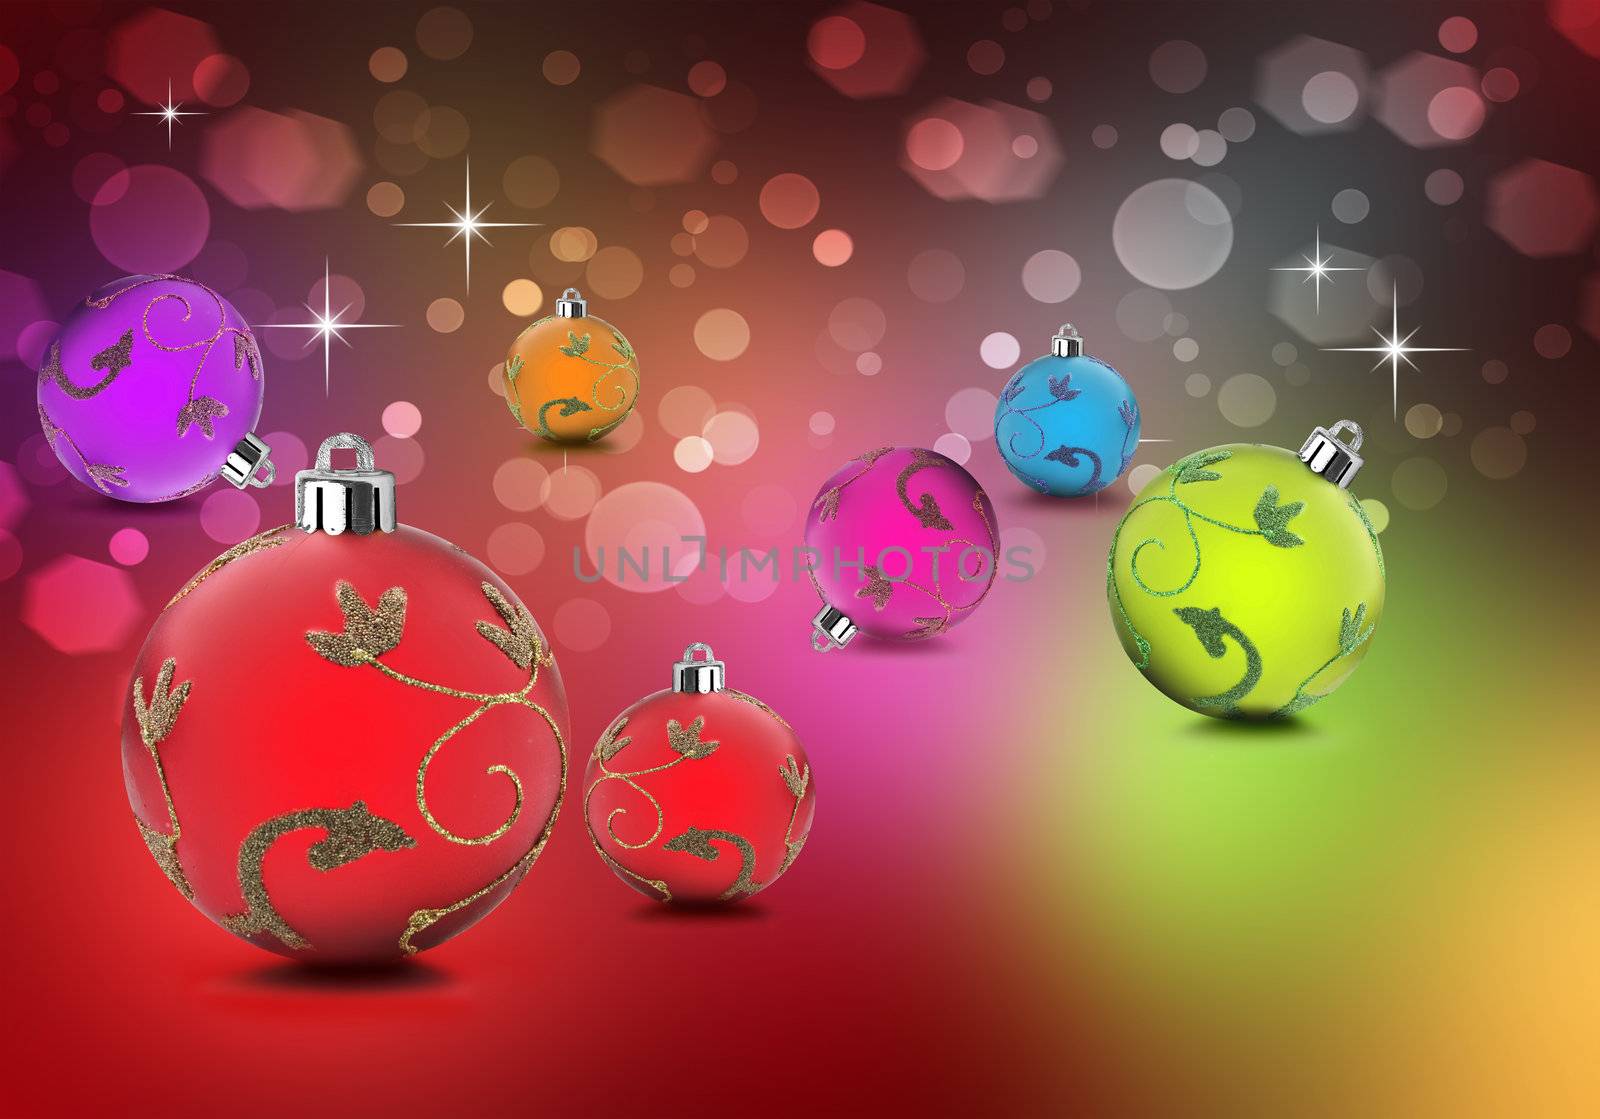 Christmas in bright colors shining against background by tish1